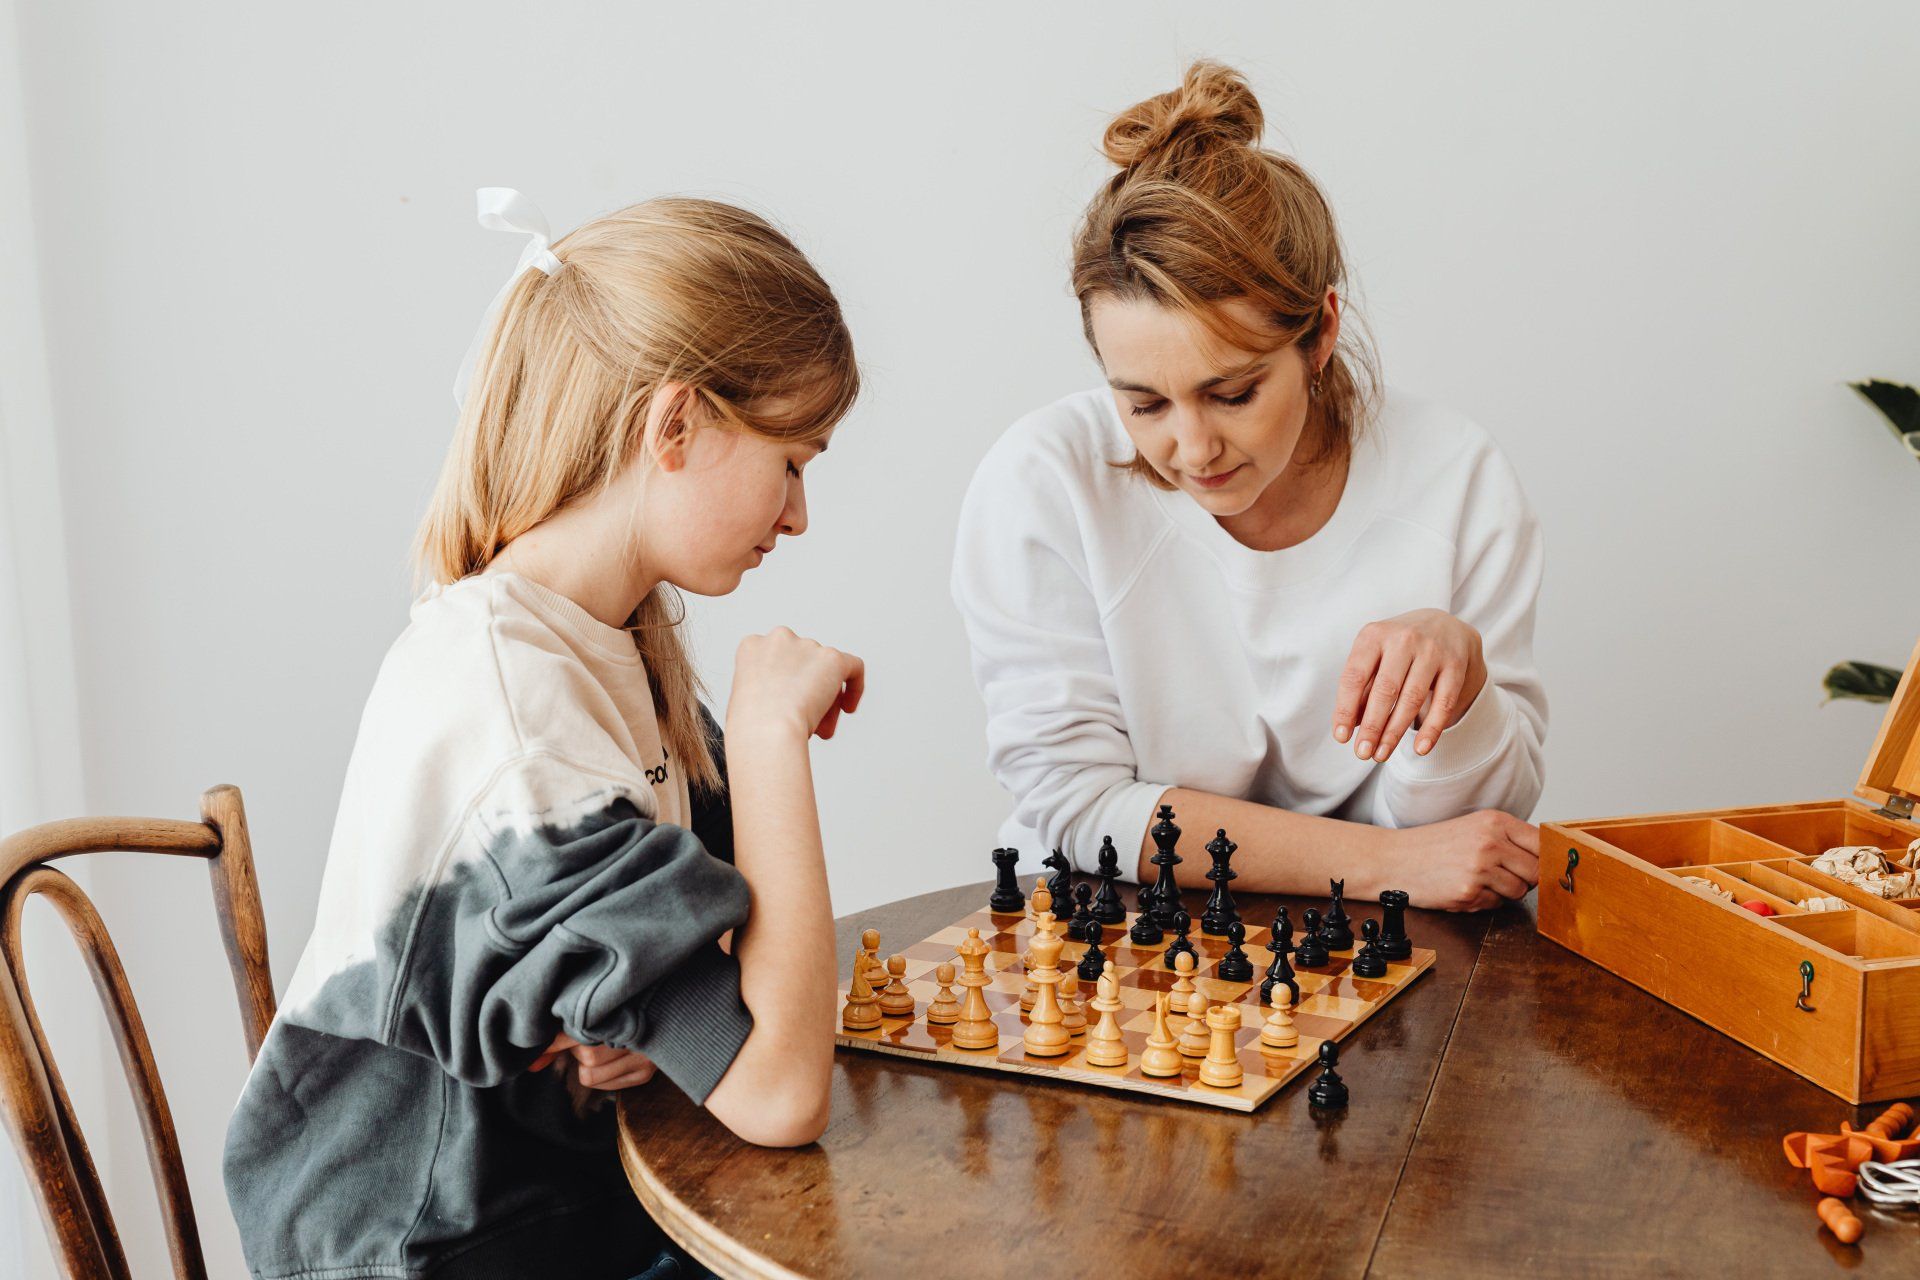 An image of a female adult with a female teenager playing a game of chess